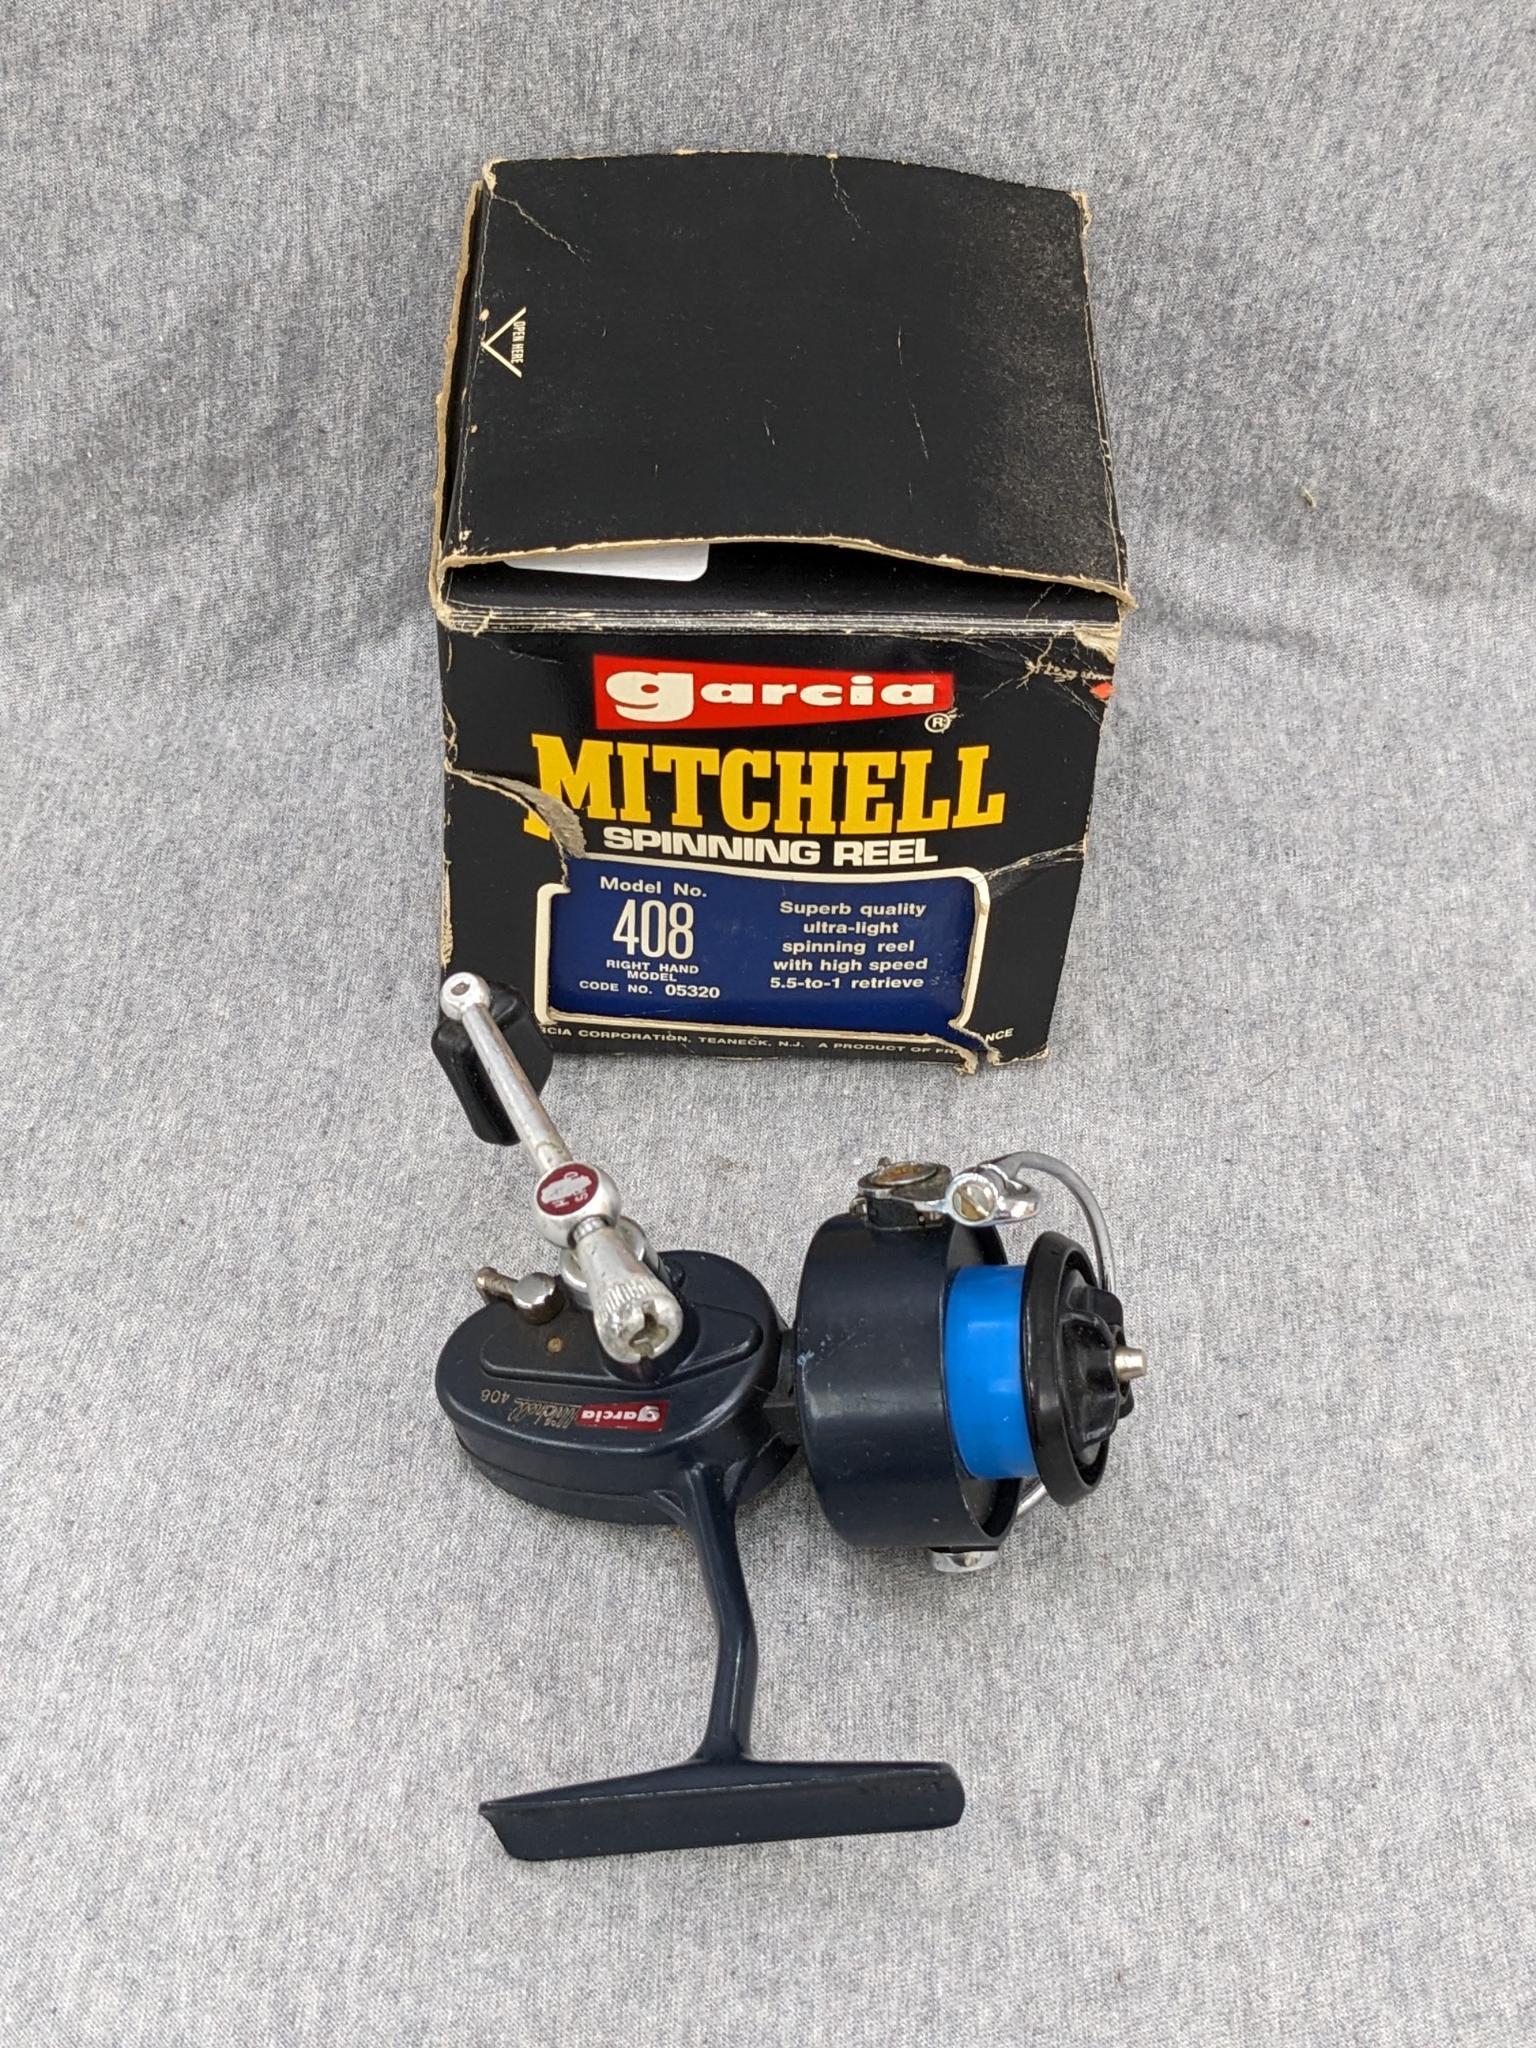 Vintage Garcia Mitchell 408 spinning reel with